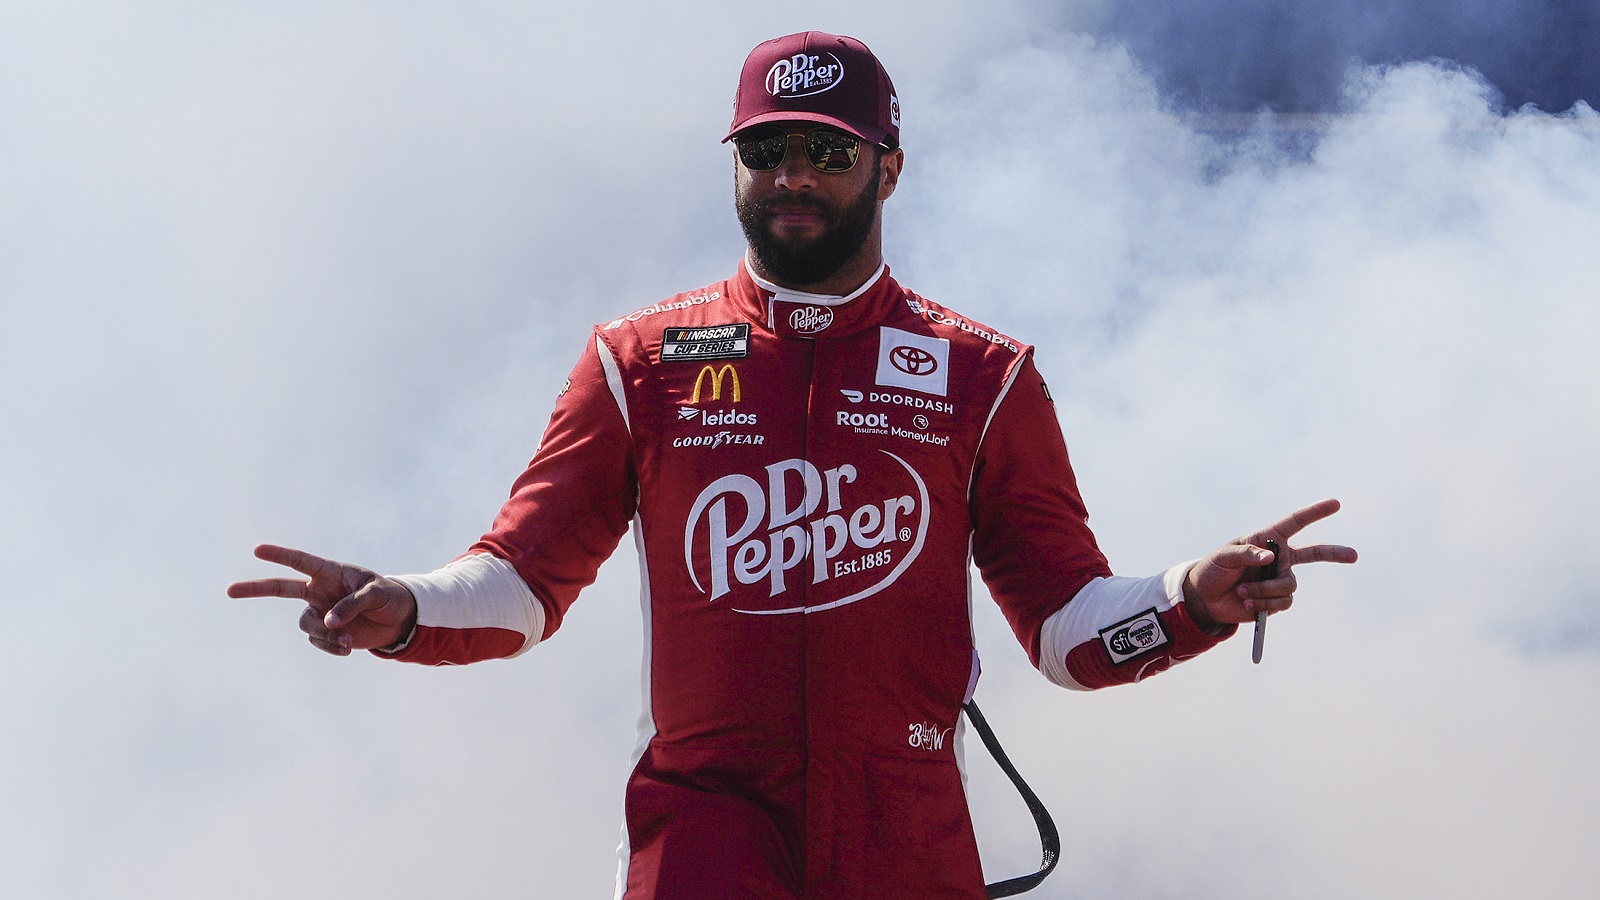 NASCAR 3-Wide Notebook: Bubba Wallace Can Join an Elite Group With a Top-2 Day at Talladega